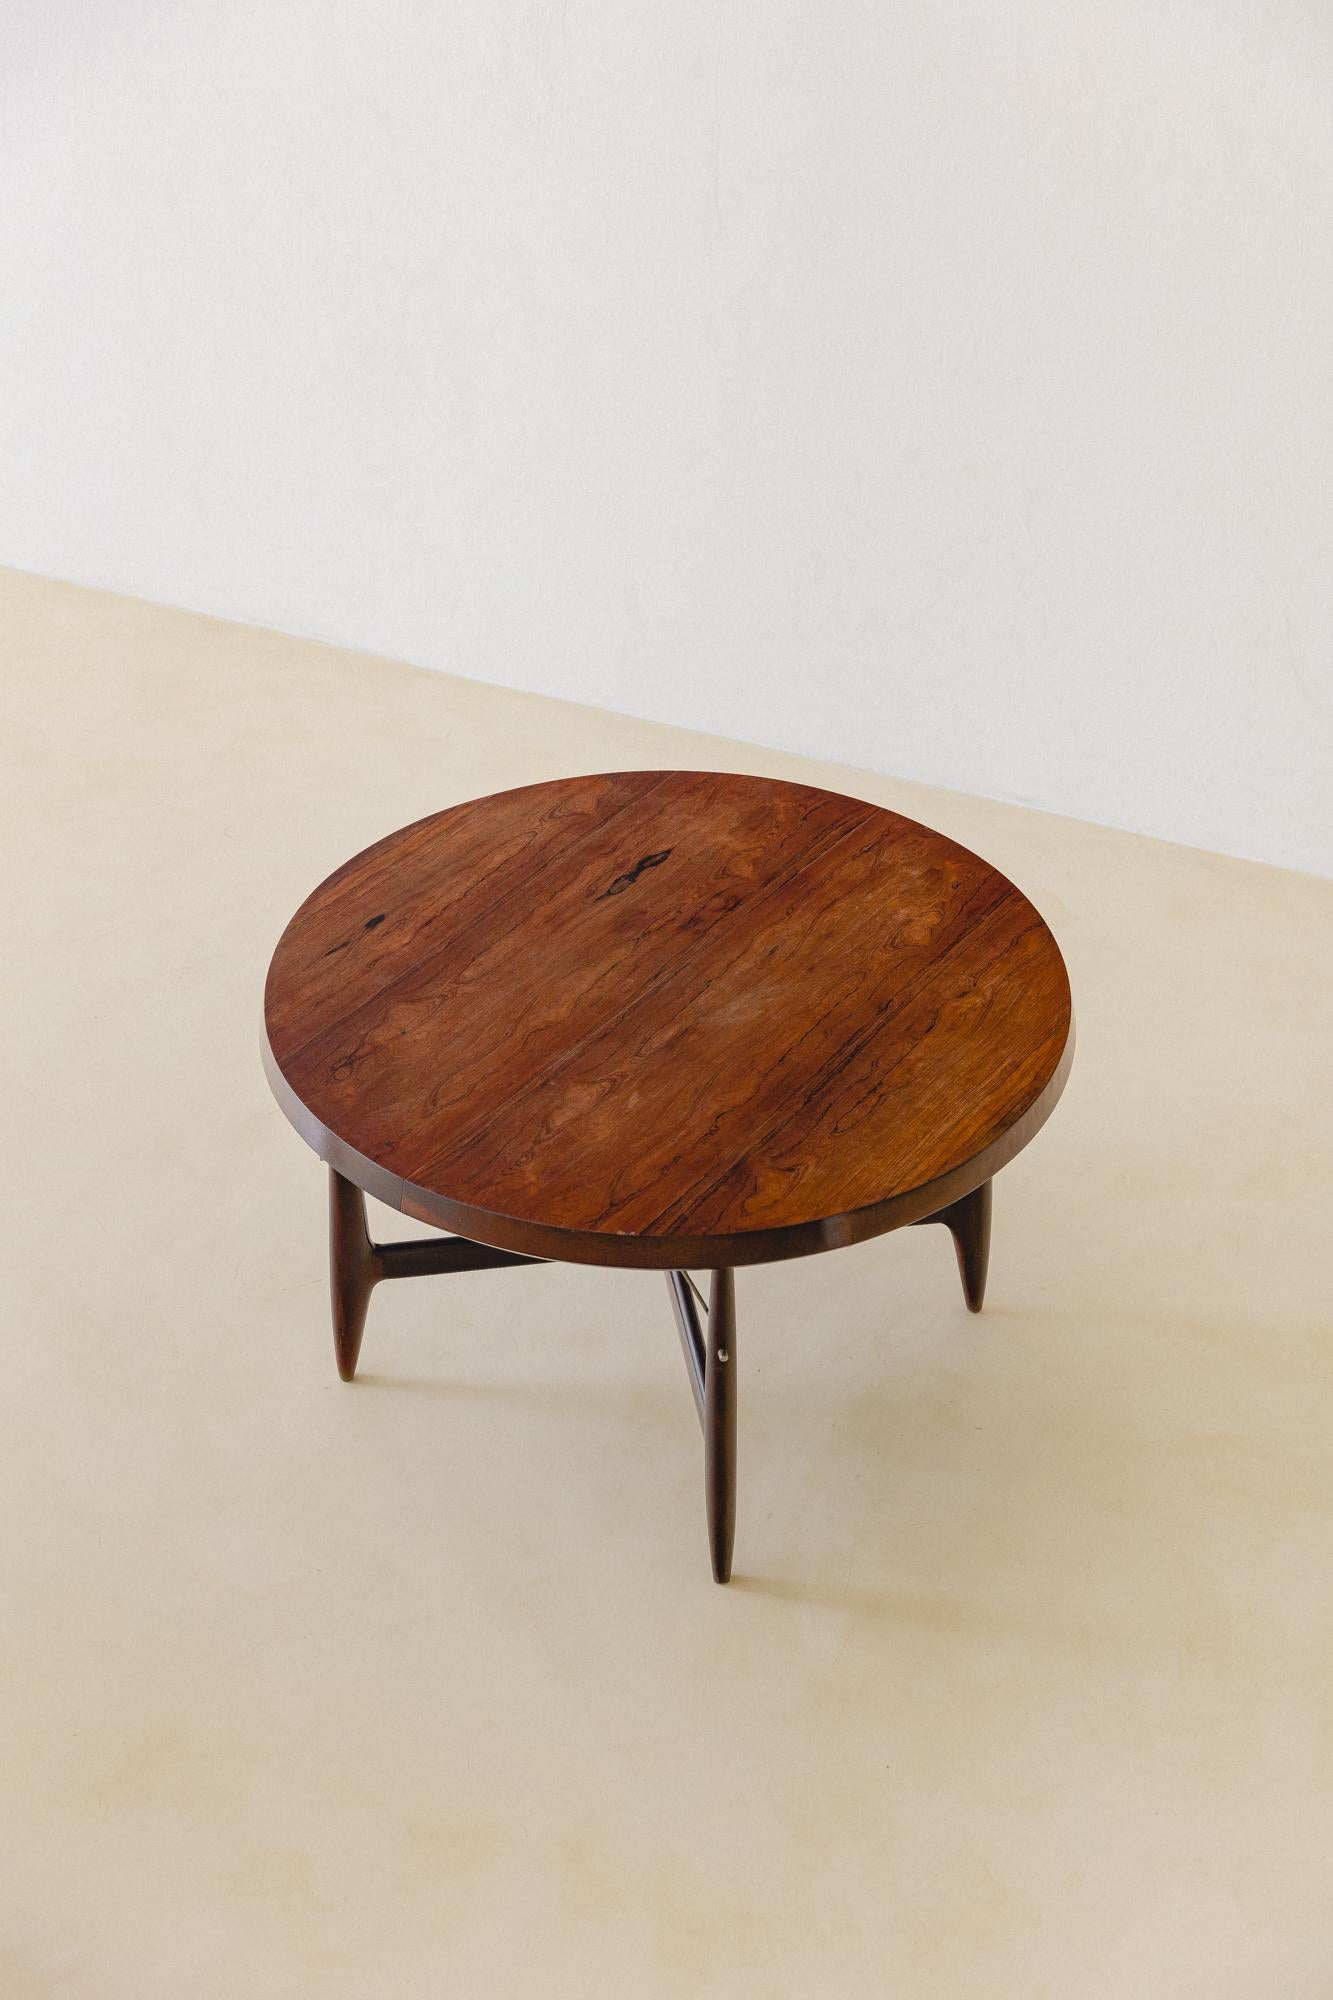 Mid-Century Modern Stella Round Expandable Table by Sergio Rodrigues, Brazilian Midcentury Design For Sale